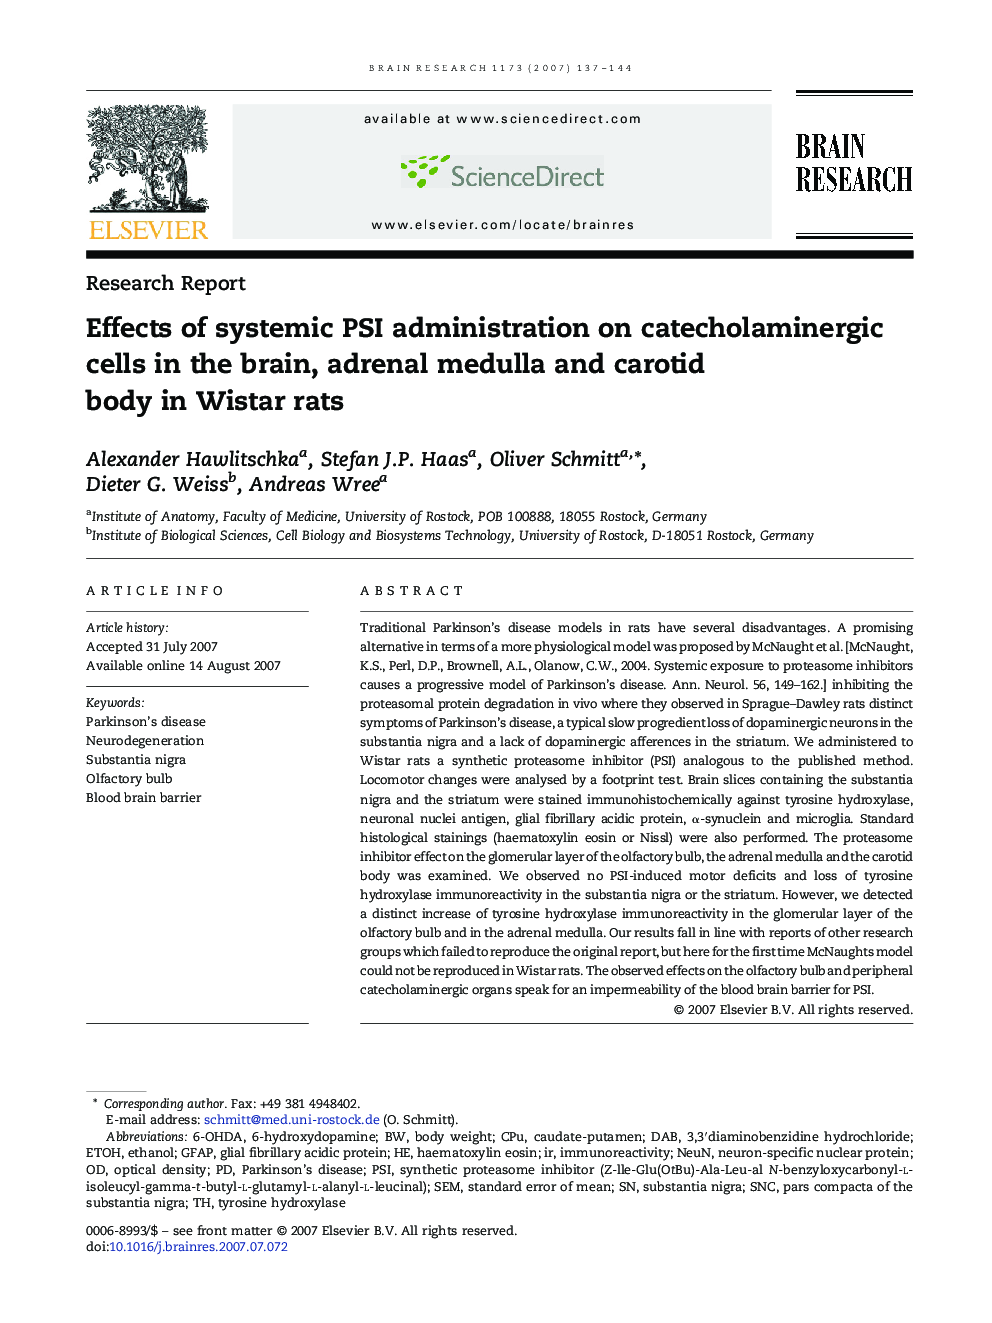 Effects of systemic PSI administration on catecholaminergic cells in the brain, adrenal medulla and carotid body in Wistar rats